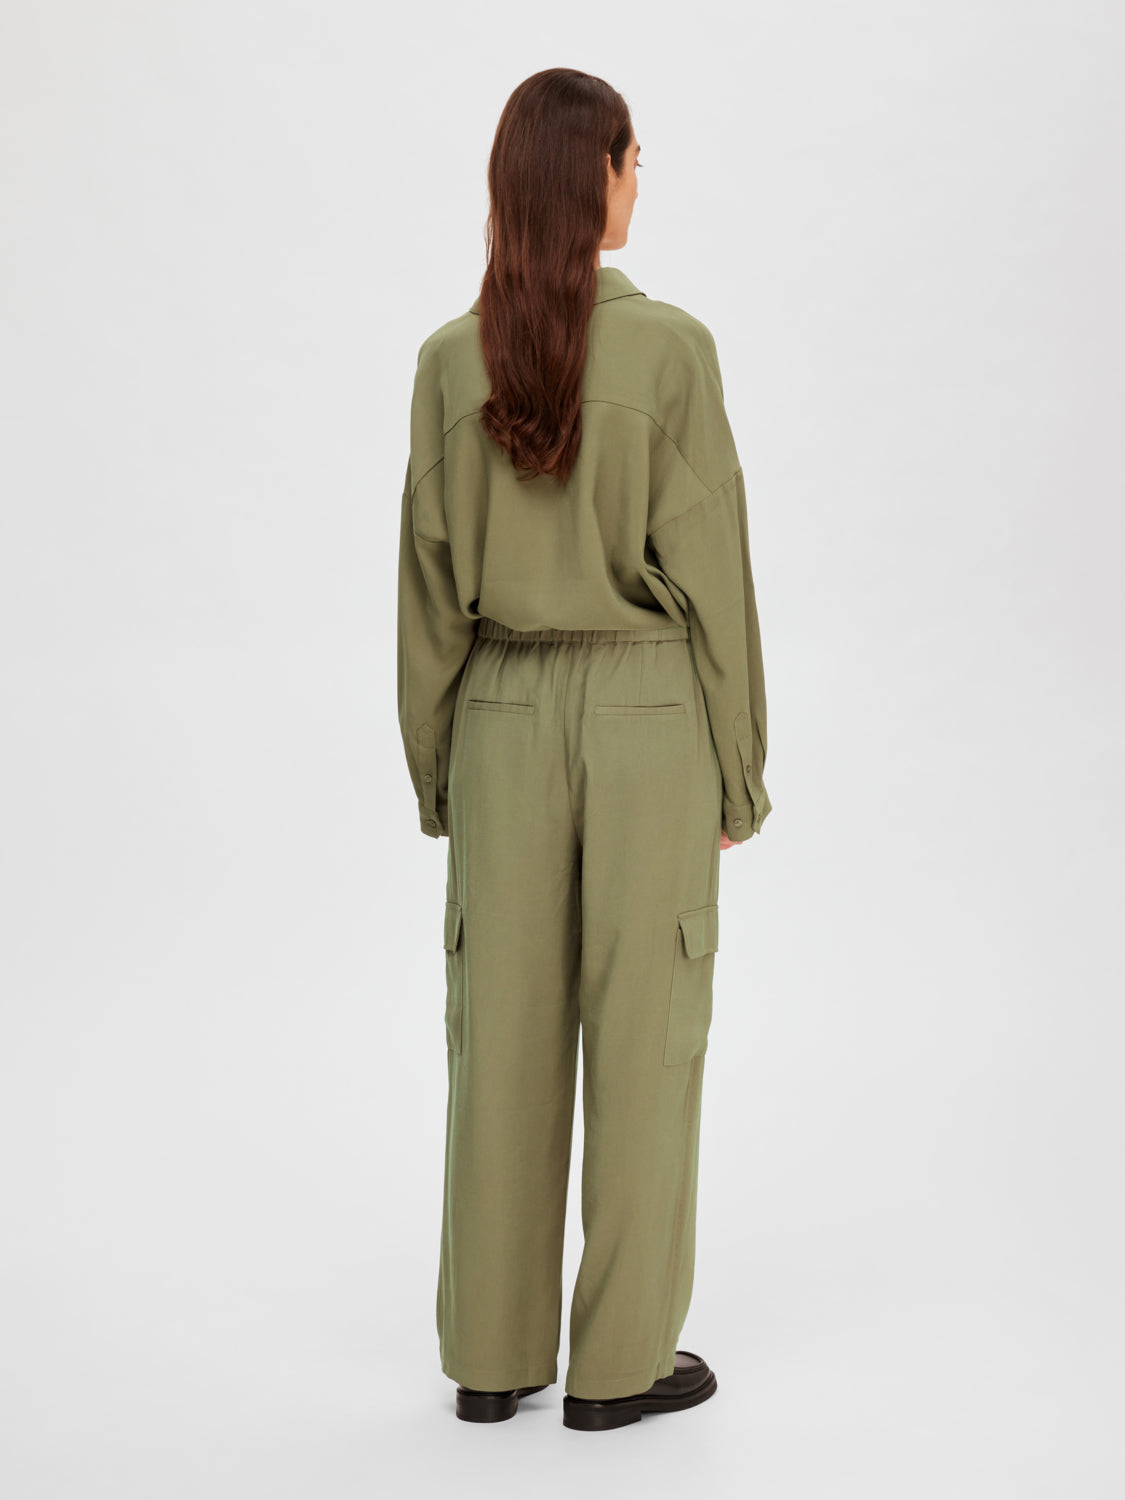 SELECTED FEMME - EMBERLY Pants - Dusky Green